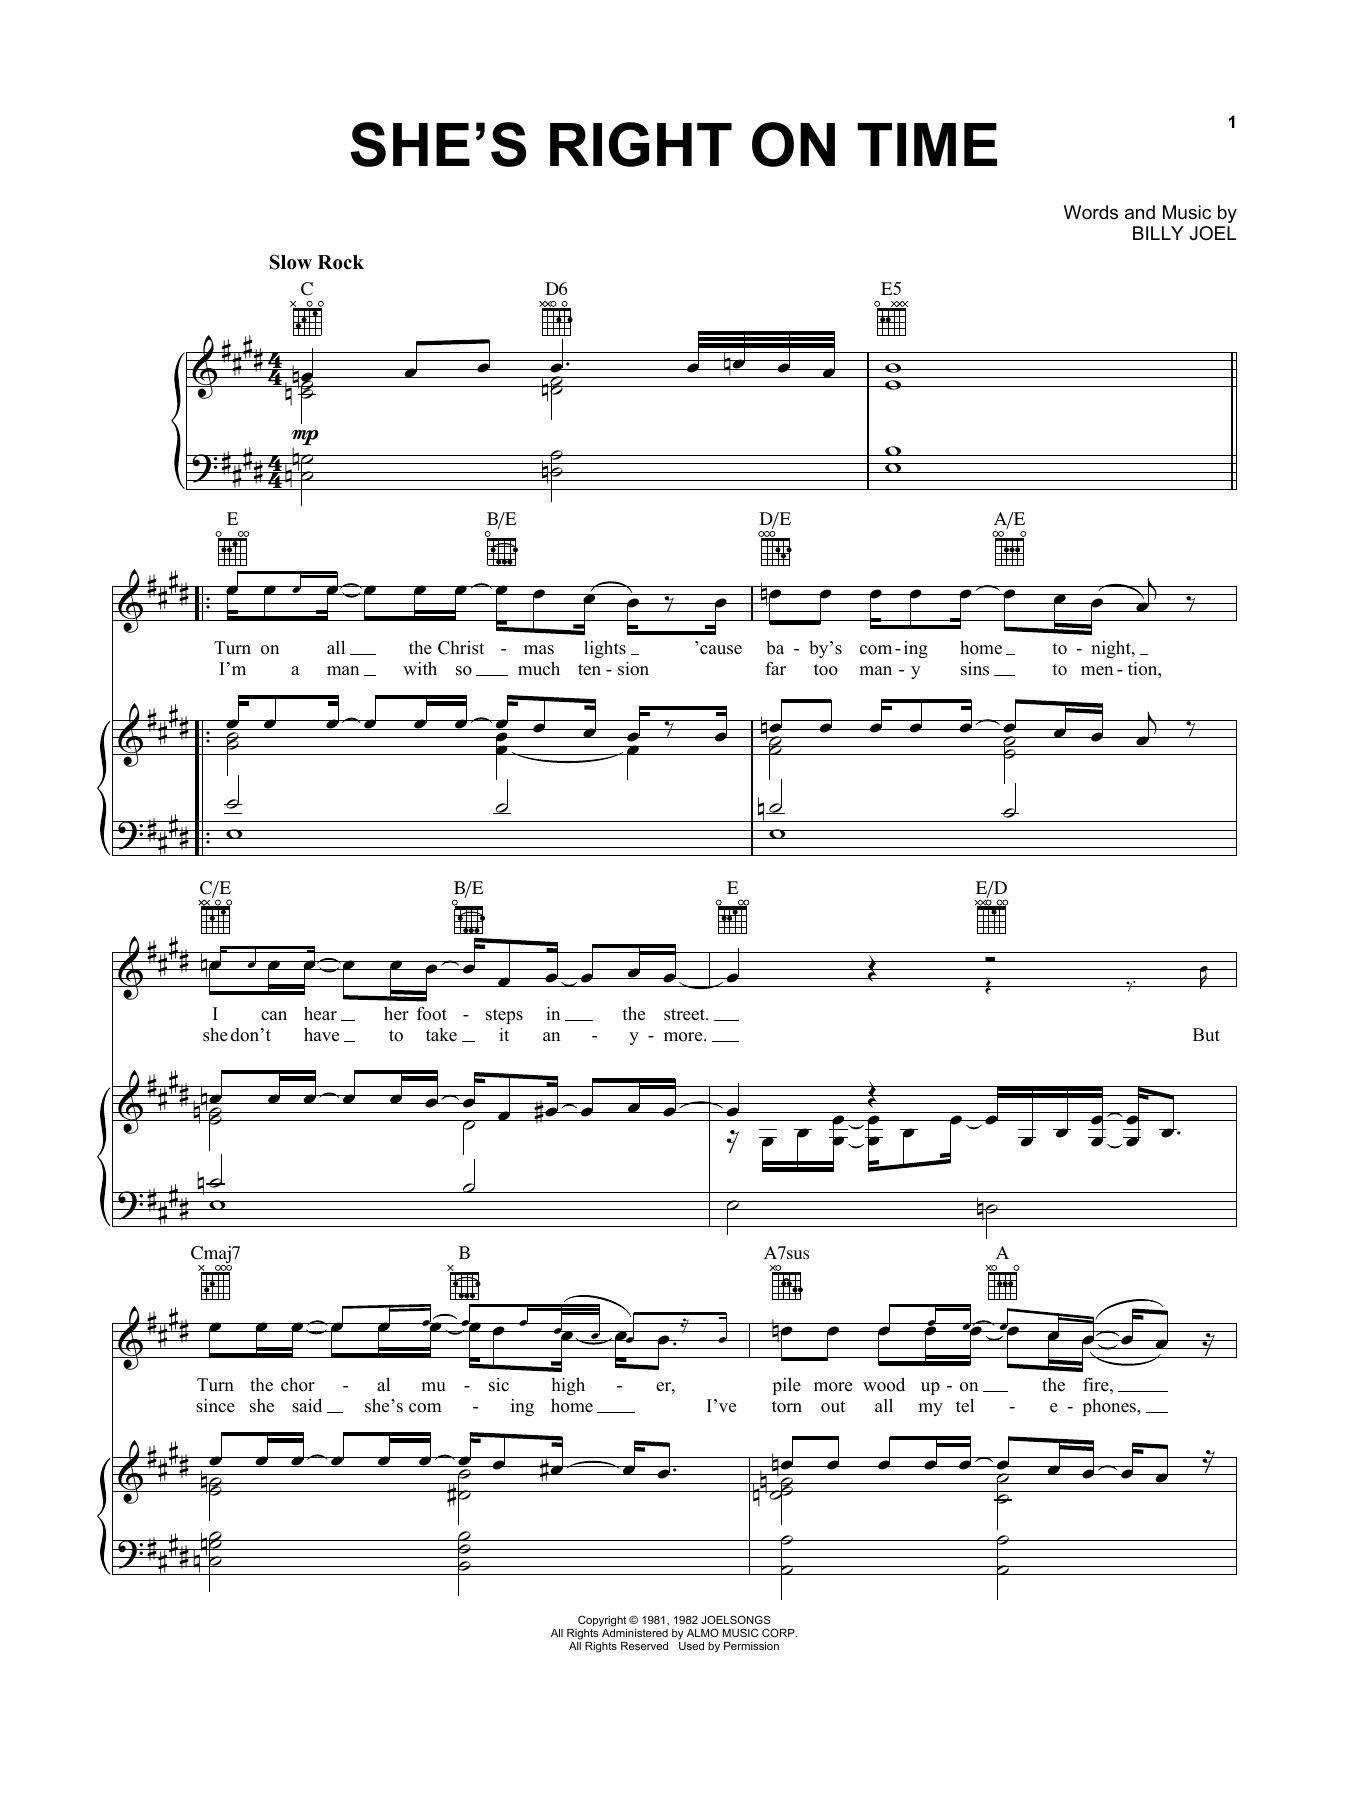 Download Billy Joel She's Right On Time Sheet Music